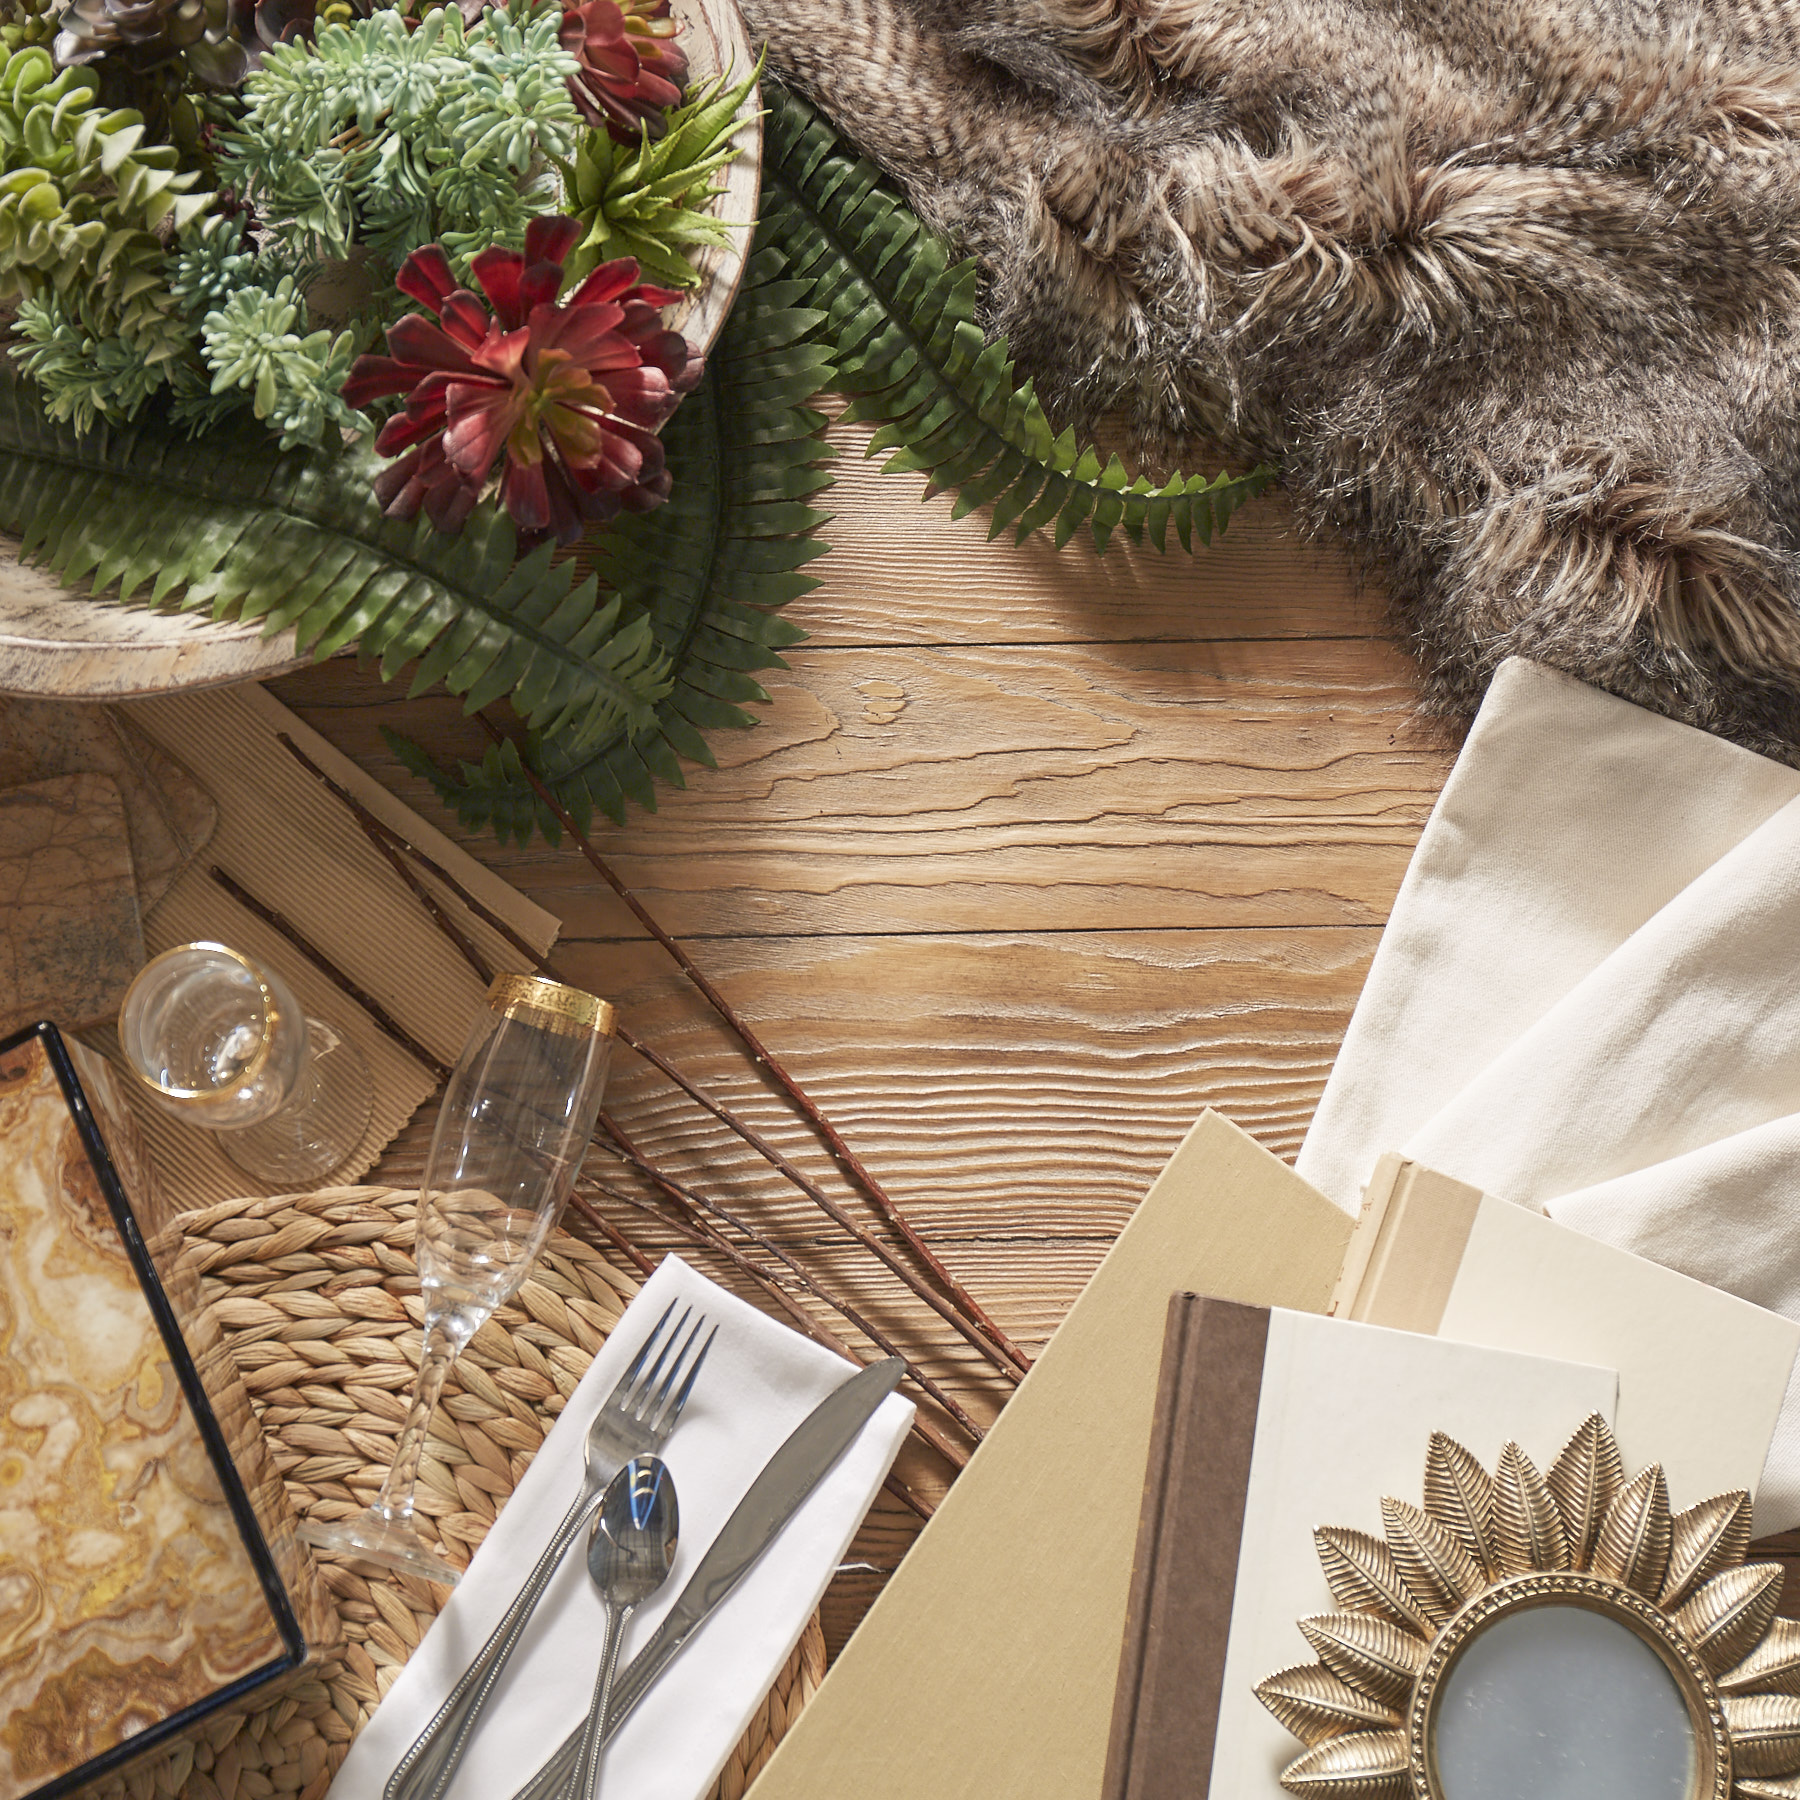 This image sets the mood for a modern and rustic space. It shows a top-down view of a wooden table, which is decorated with a variety of elements including paper, faux greenery, faux fur,  and some fabric.